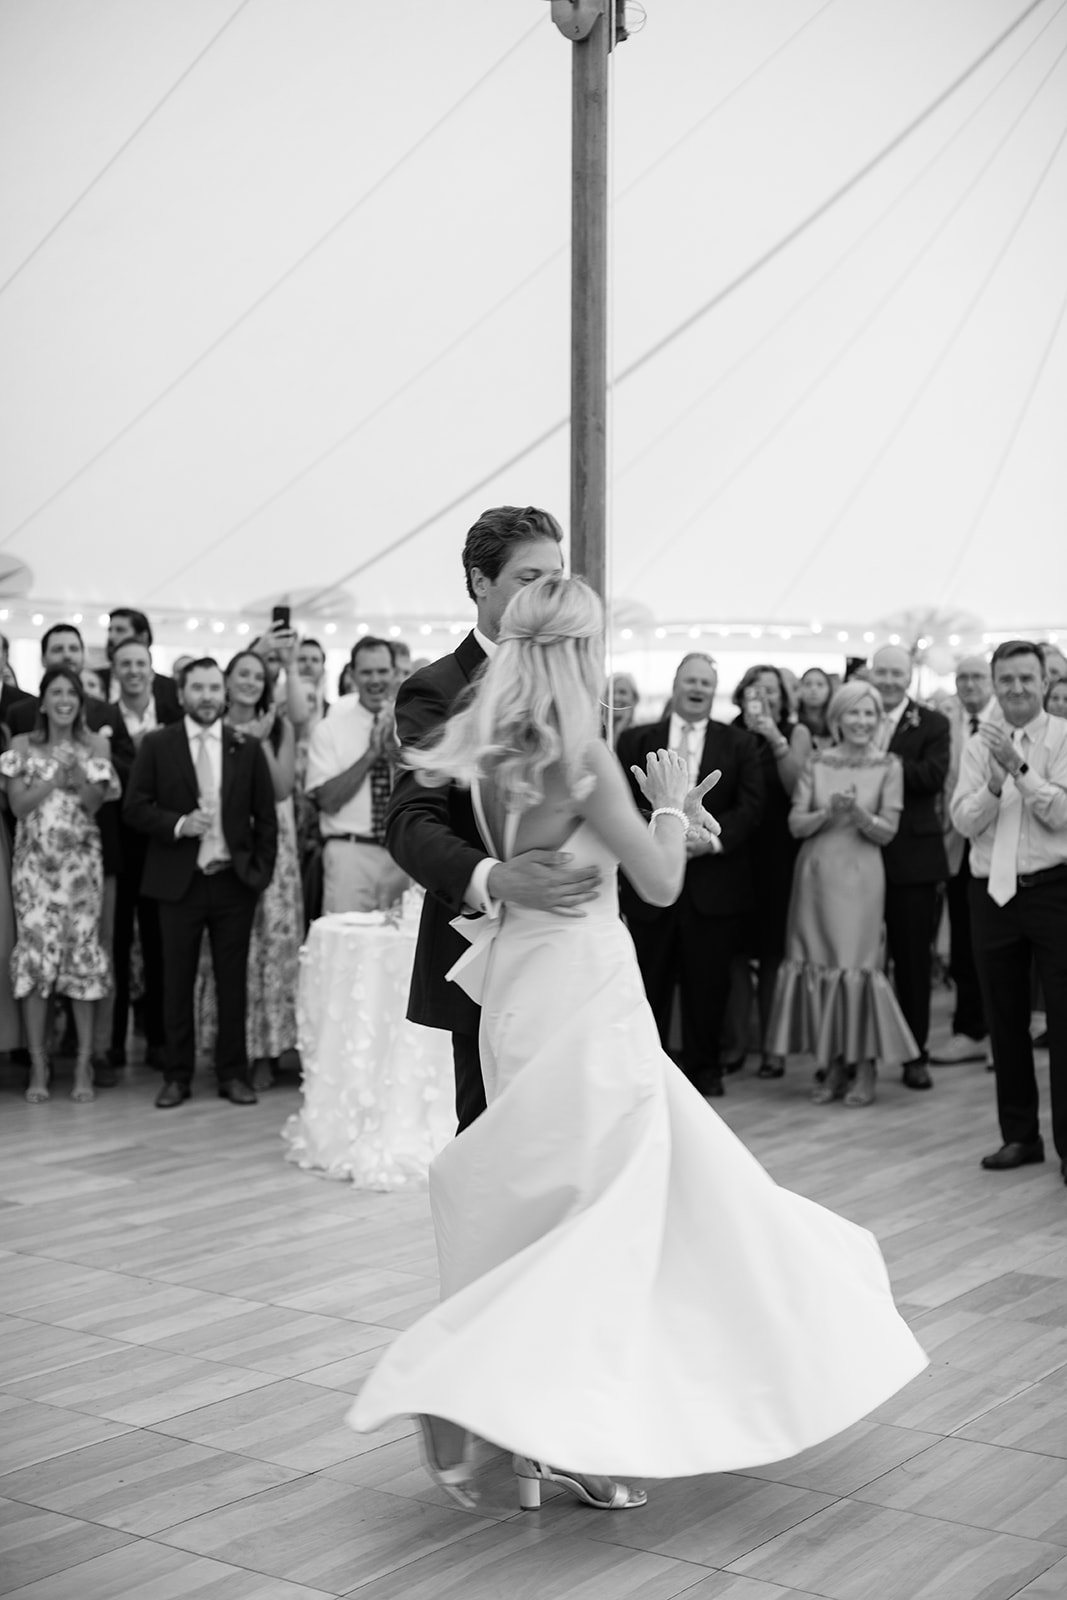 Bride and groom sharing a first dance on the dance floor with the bride's dress twirling 